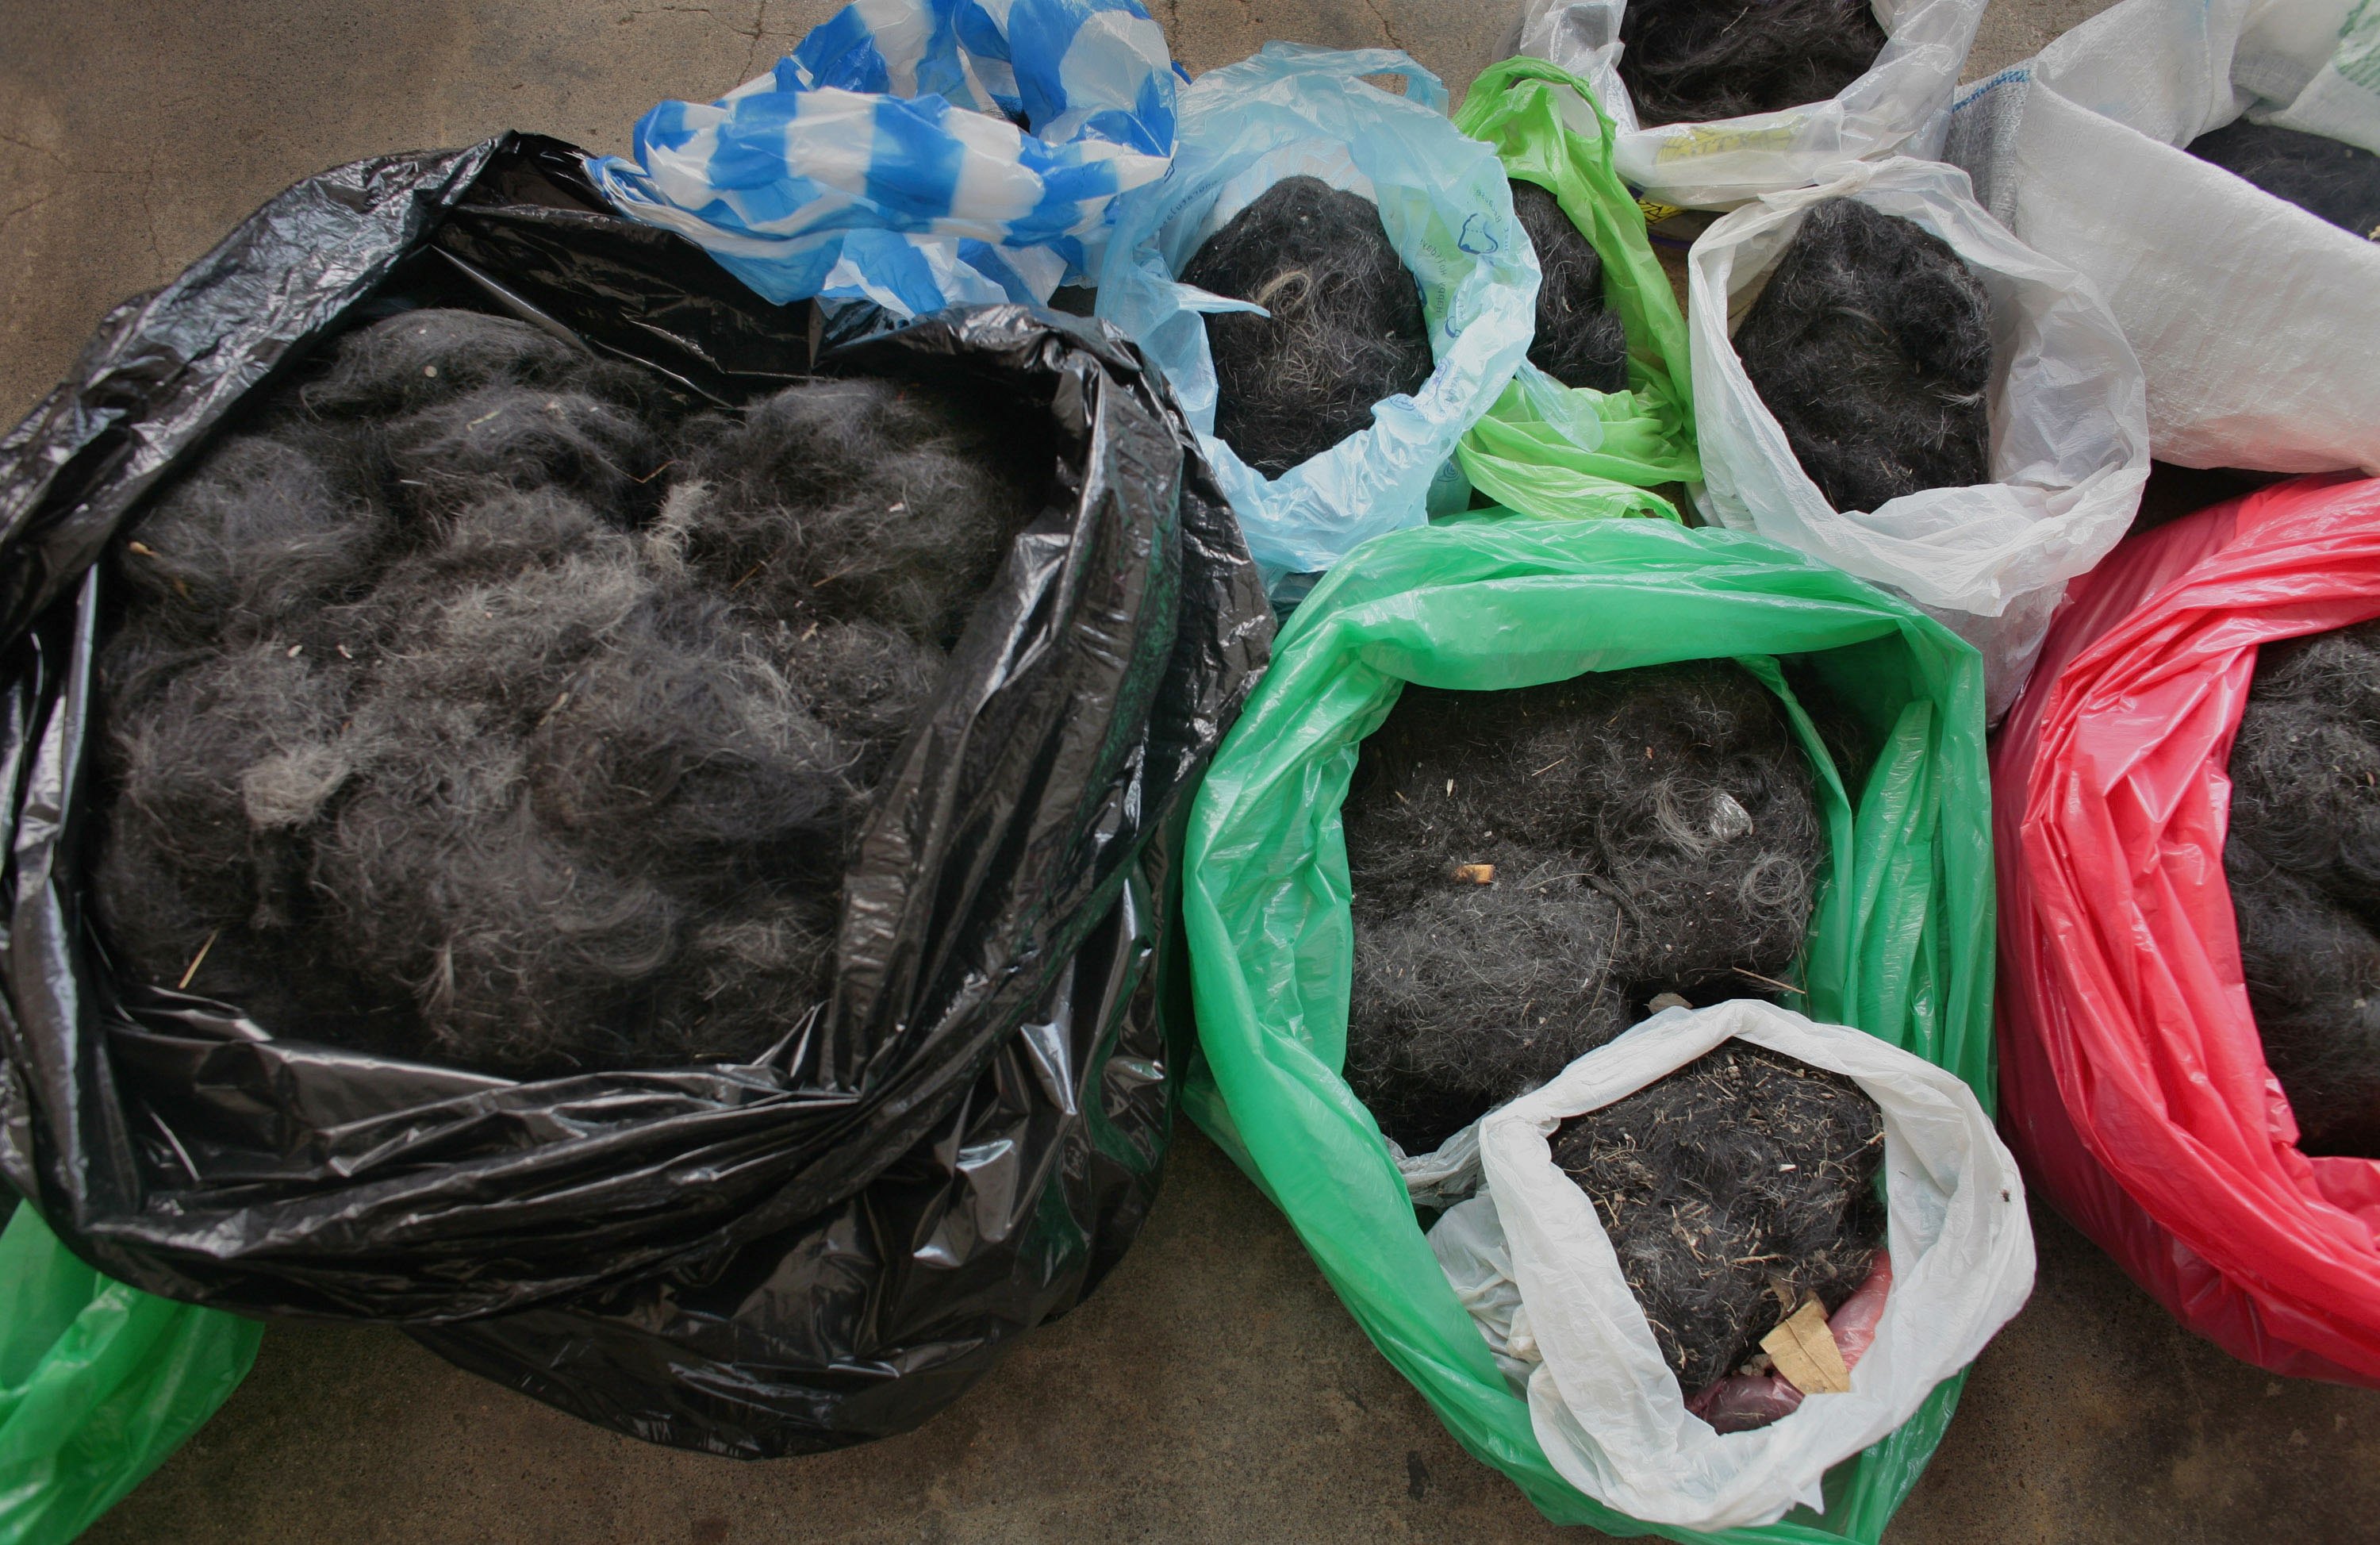 Bags stuffed with inmates' hair to help mop up the oil spill off Guimaras Island, at the National Penitentiary in Muntinlupa, August 31, 2006. (Paula Bronstein—Getty Images)